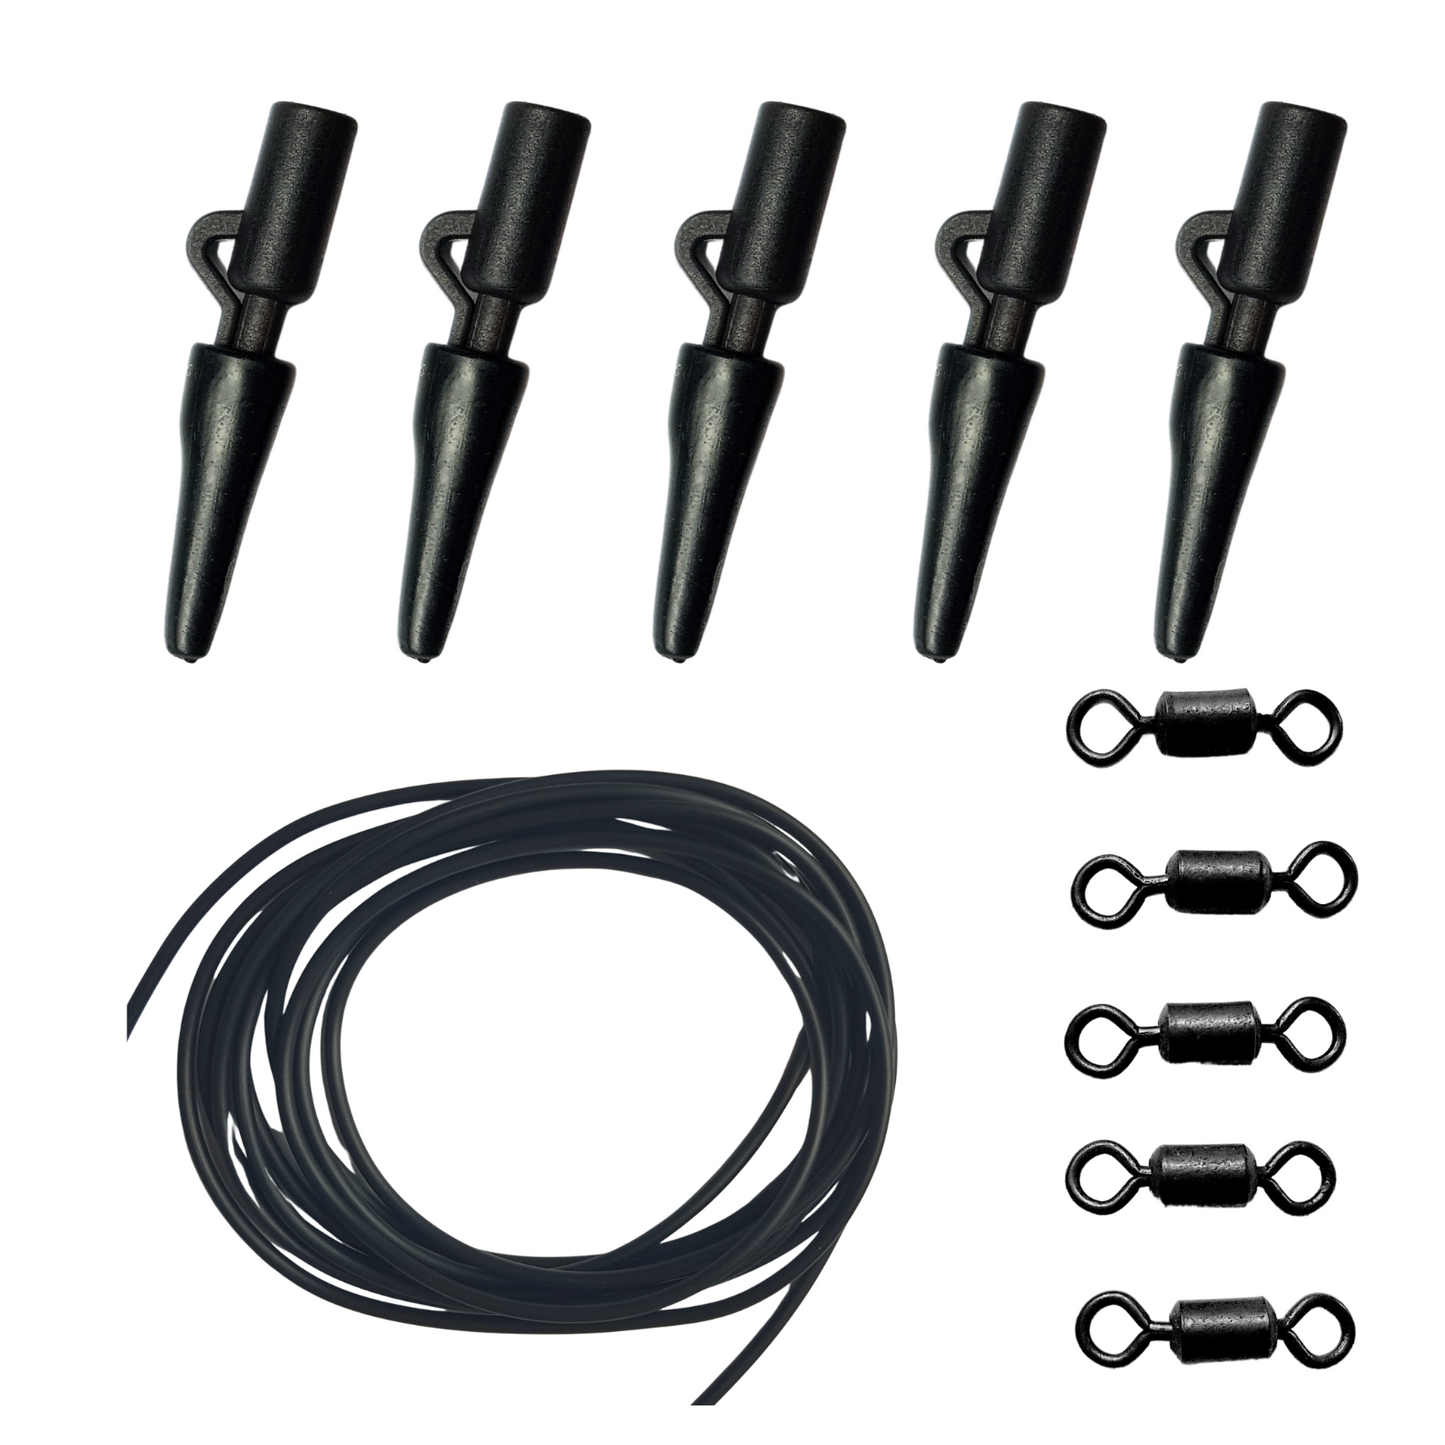 41 Piece Fishing Black Lead Clip Action Pack Inc Clips, Swivels, Tail Rubbers  6mm Beads & Tubing 